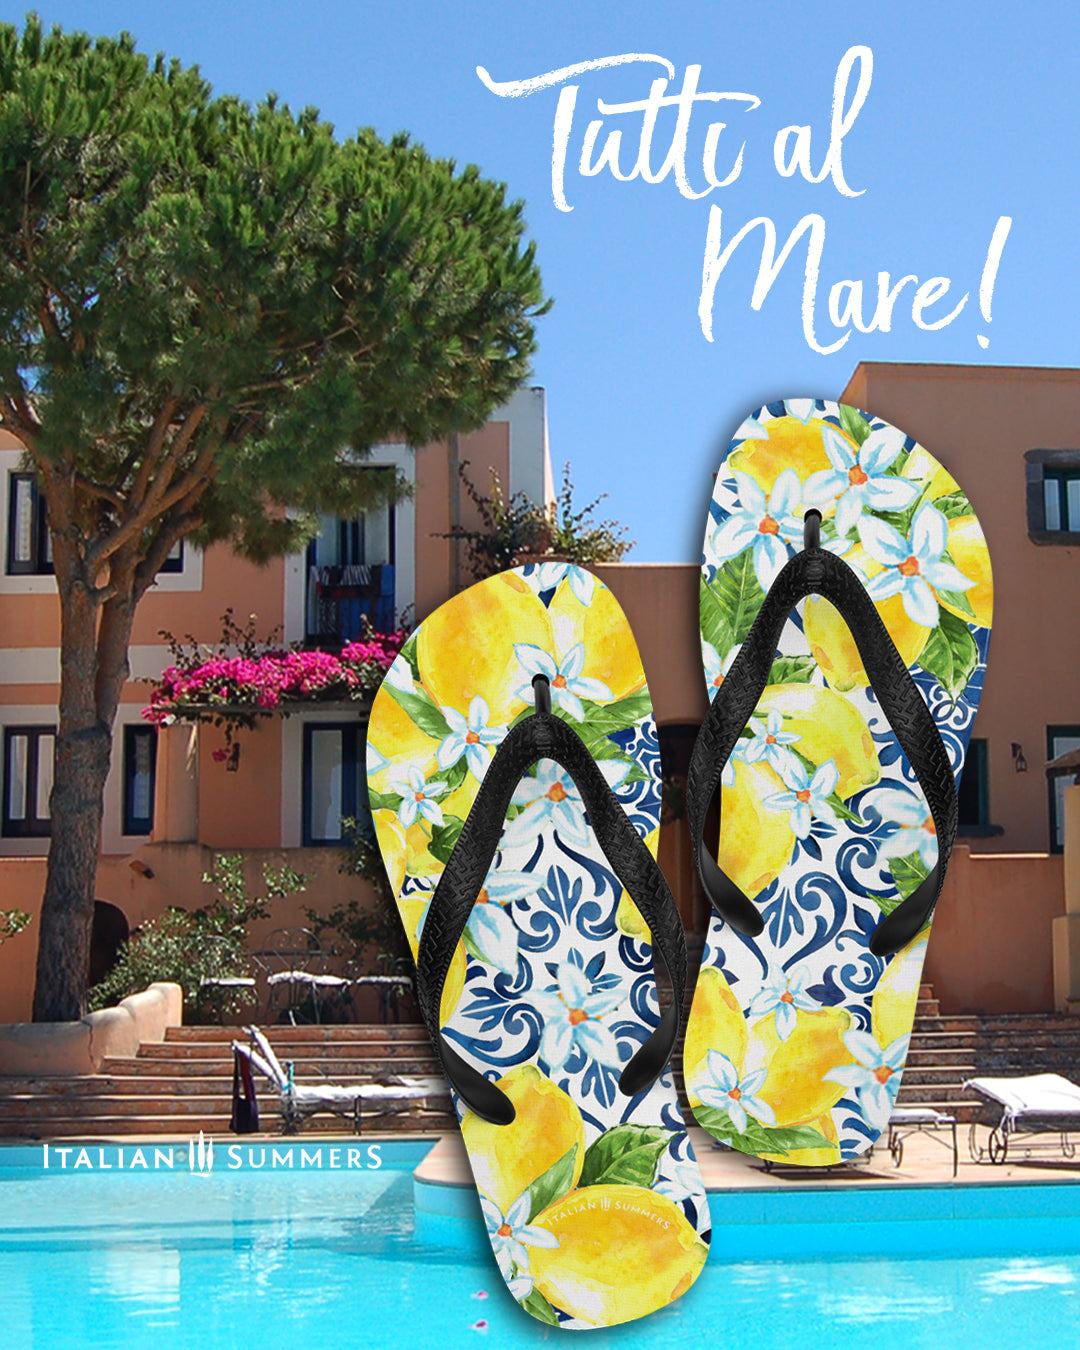 Italy flip flops with big beautiful Sorrento lemons full of white lemon blossems. From under the lemons you can see the blue vintage tiles coming true. Made by Italian Summers